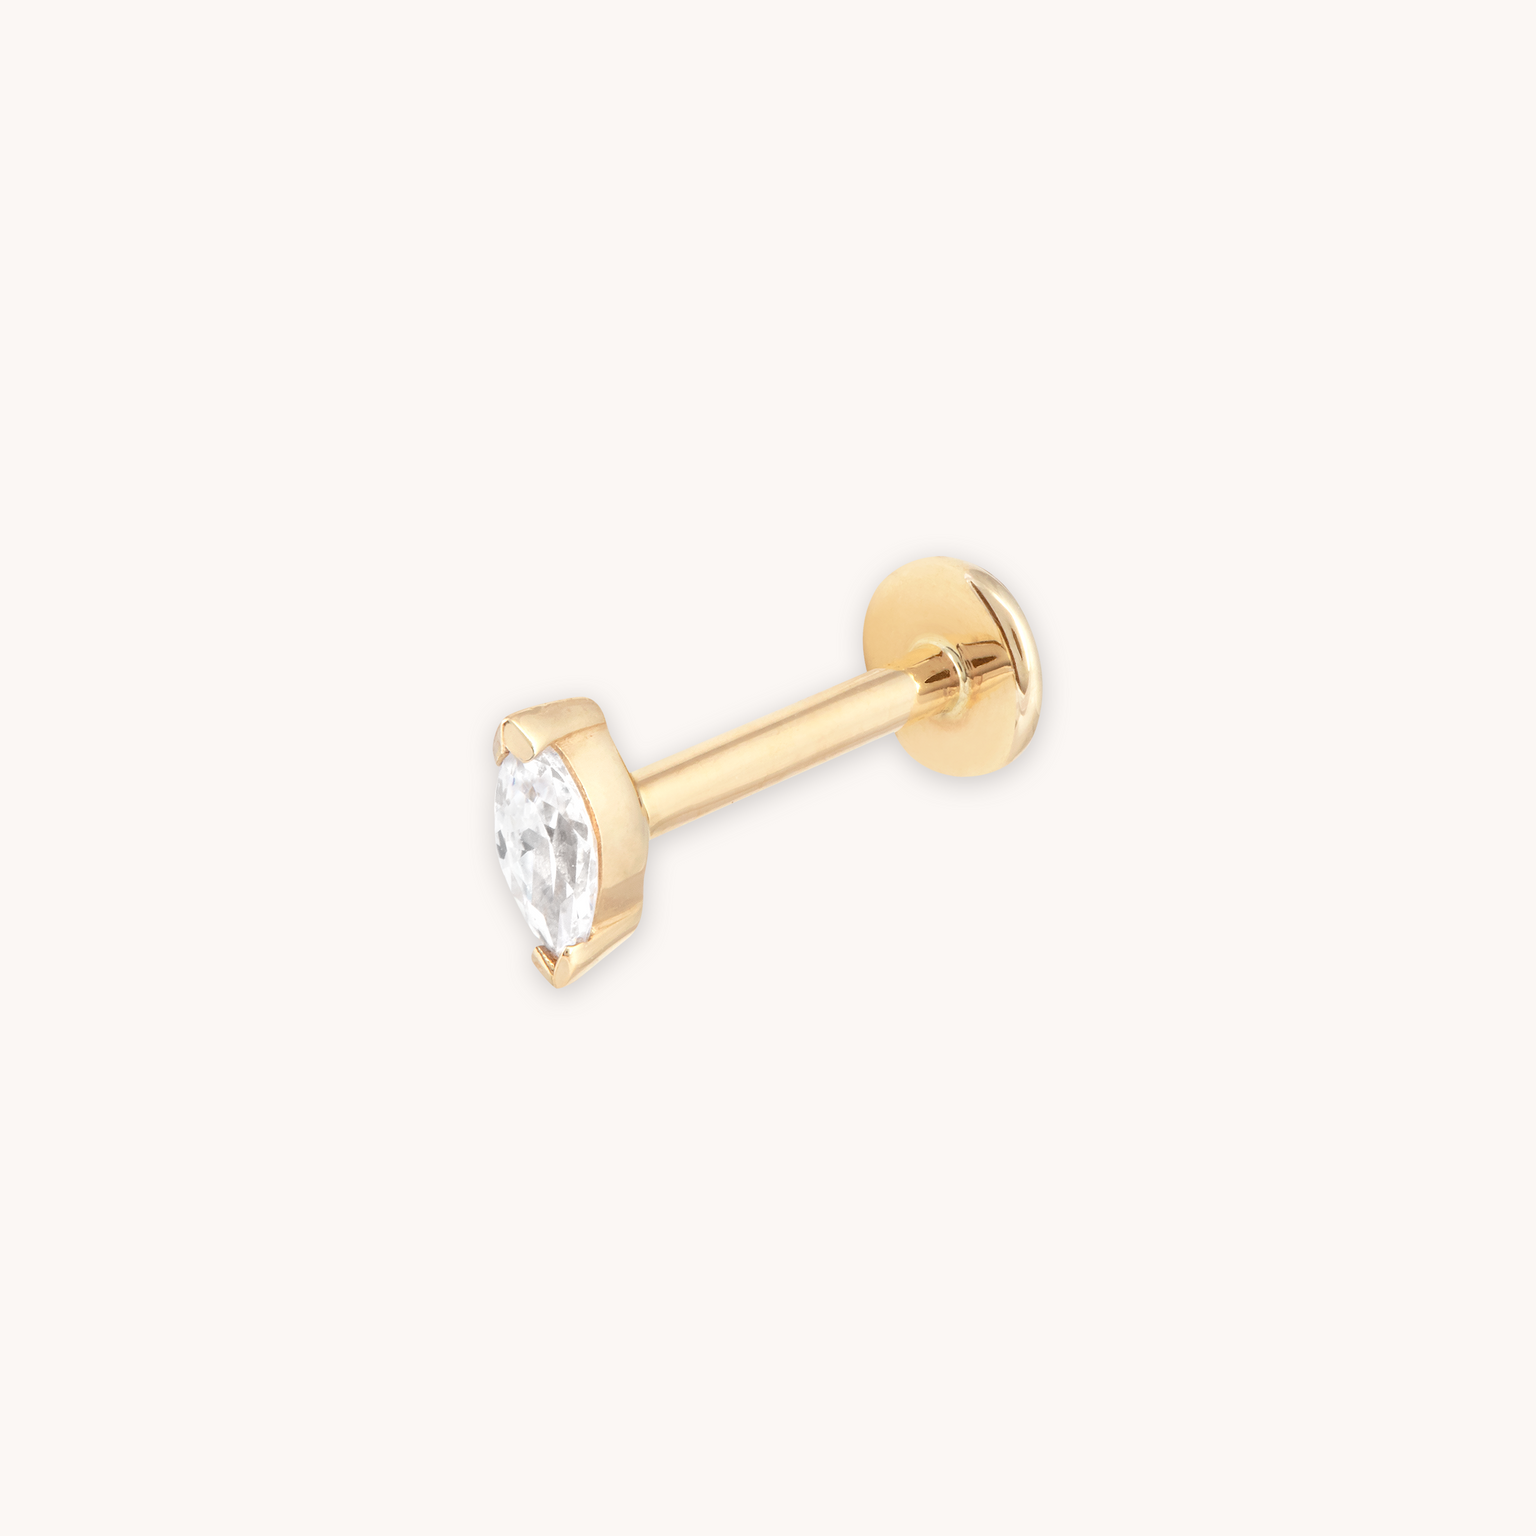 Topaz Marquise Piercing Stud 6mm in Solid Gold